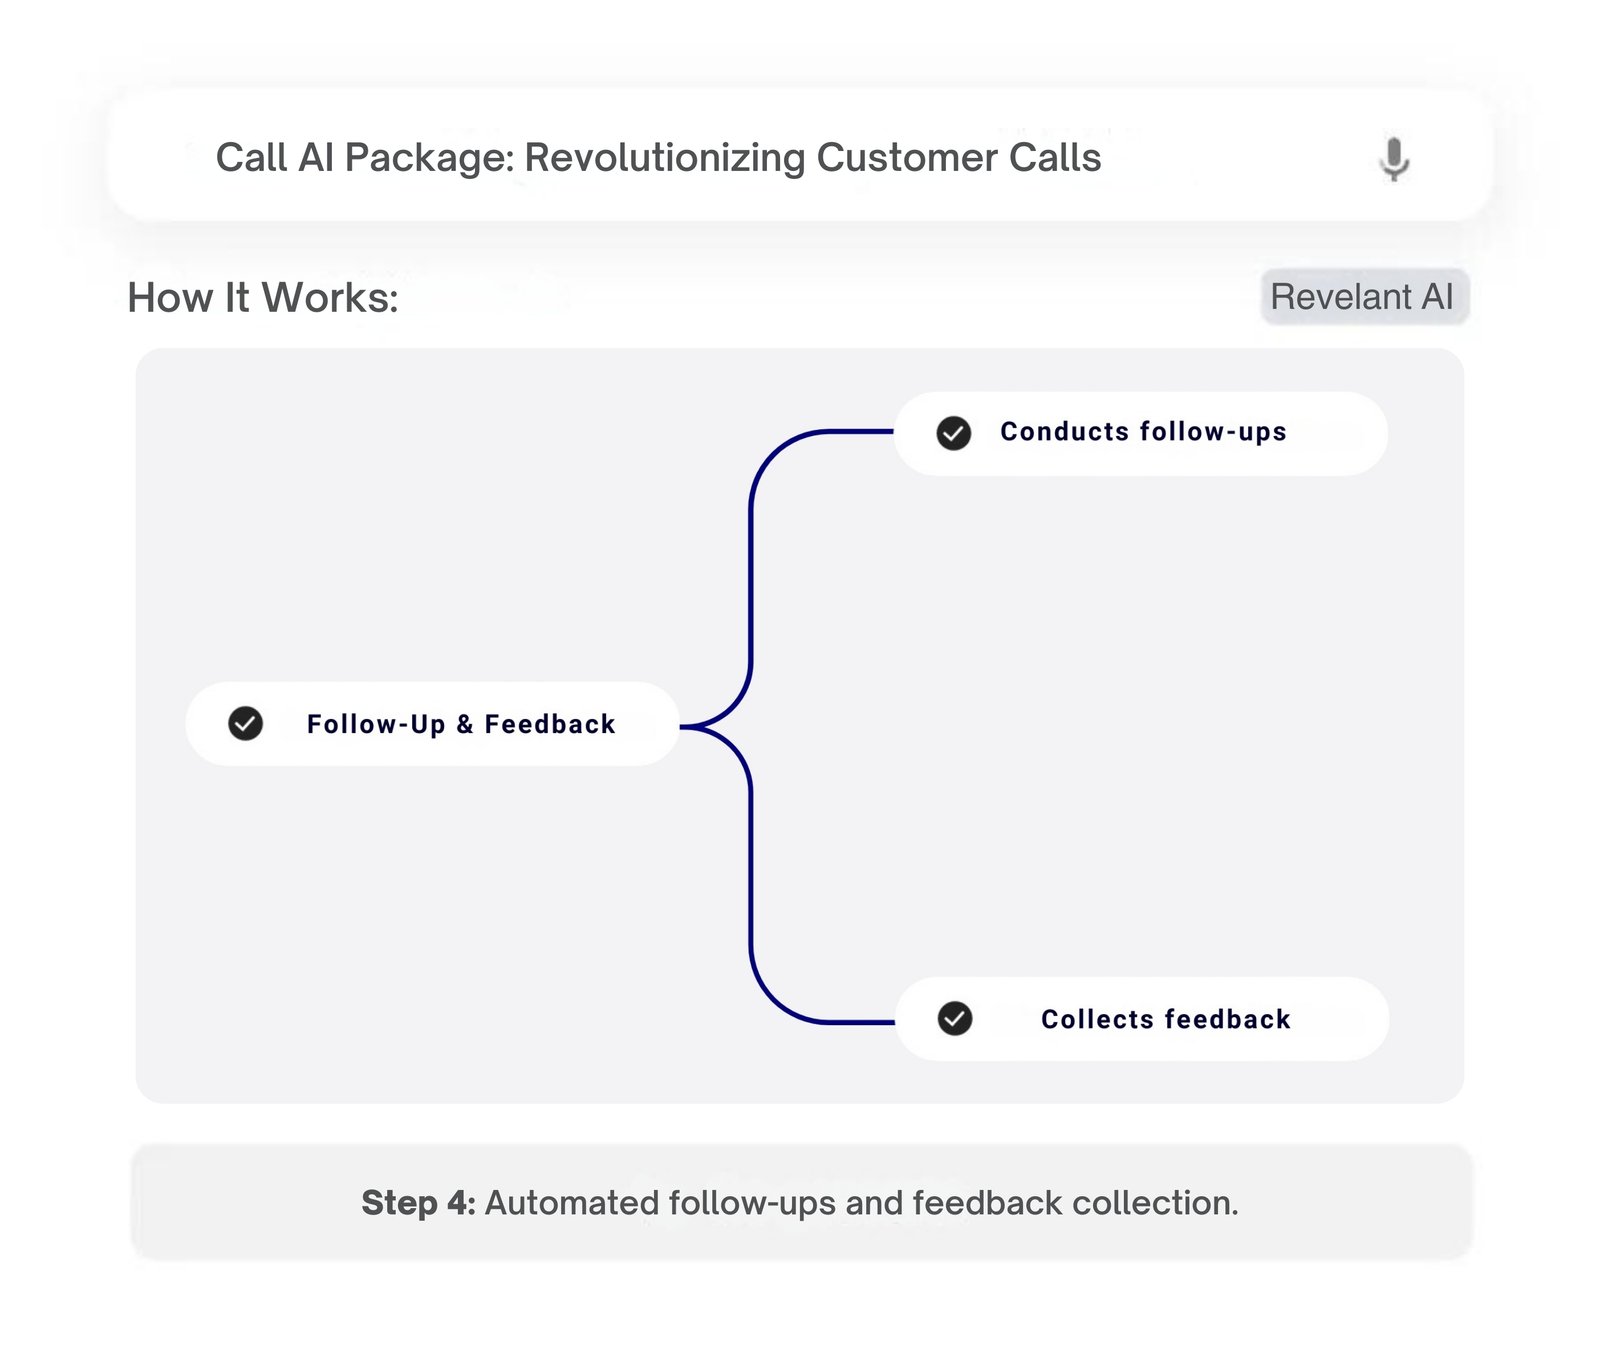 Automated AI follow-ups and feedback collection system as part of the AI call package.